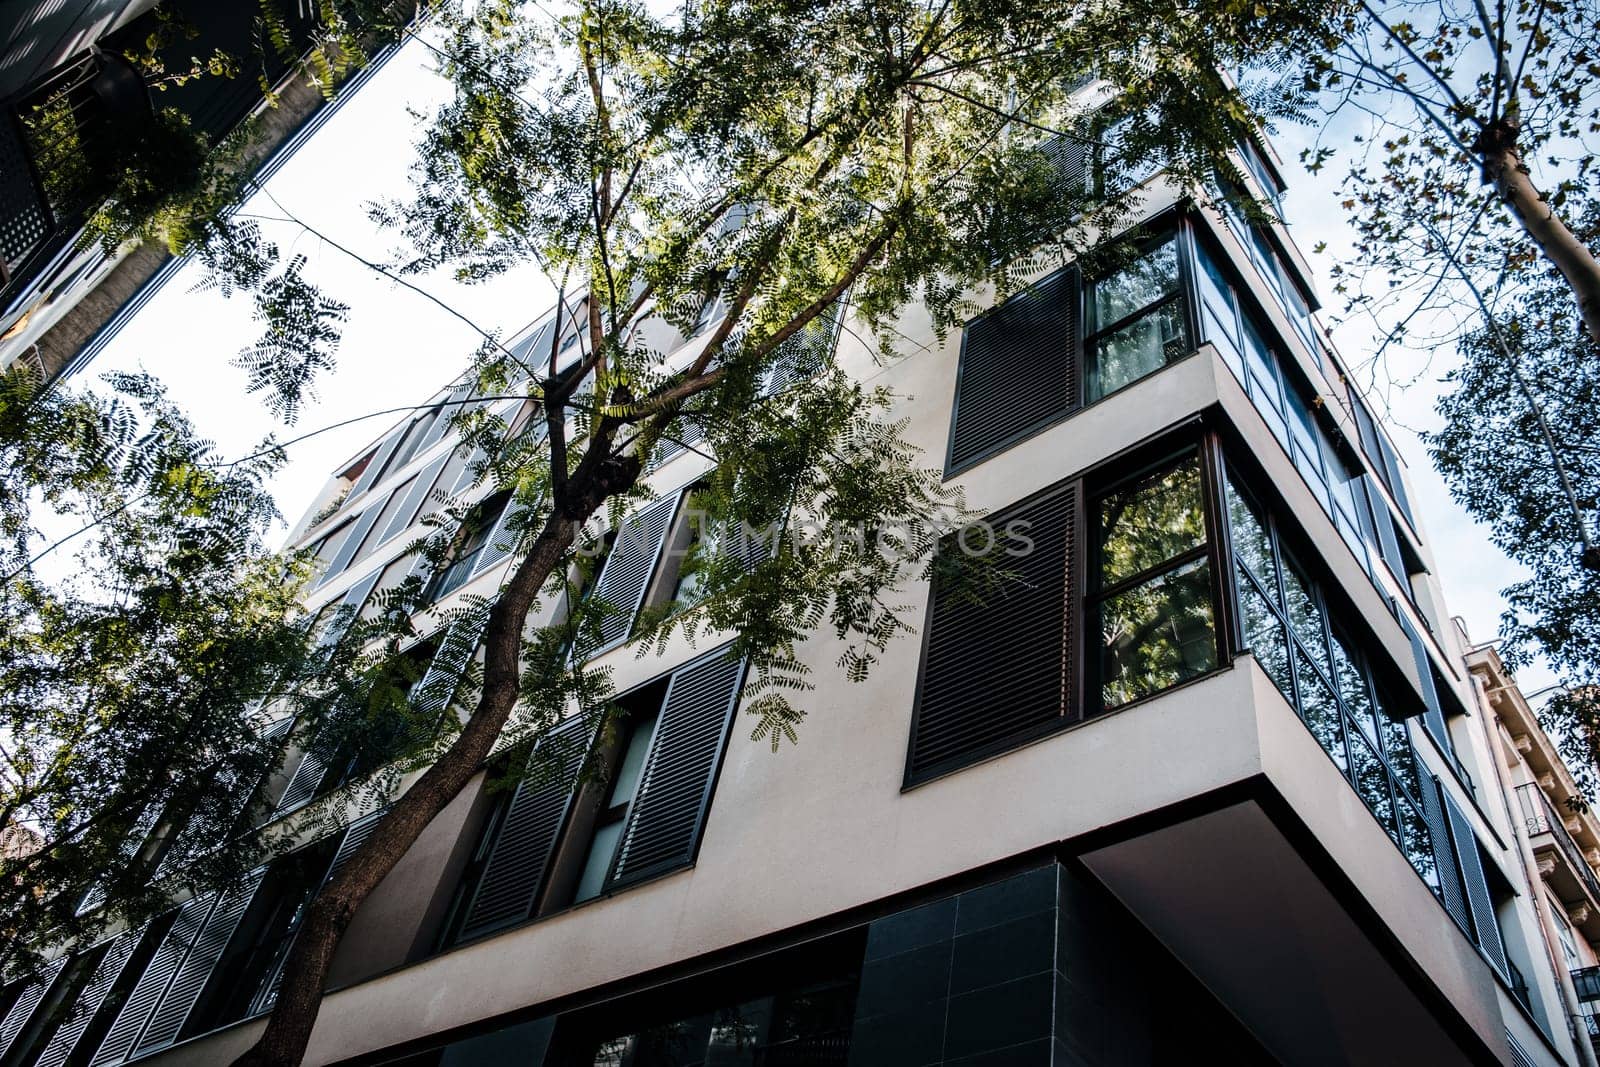 Modern apartment building with big windows, Barcelona. Green tree branches with leaves for reducing heat. Go green concept. High quality picture for wallpaper, article